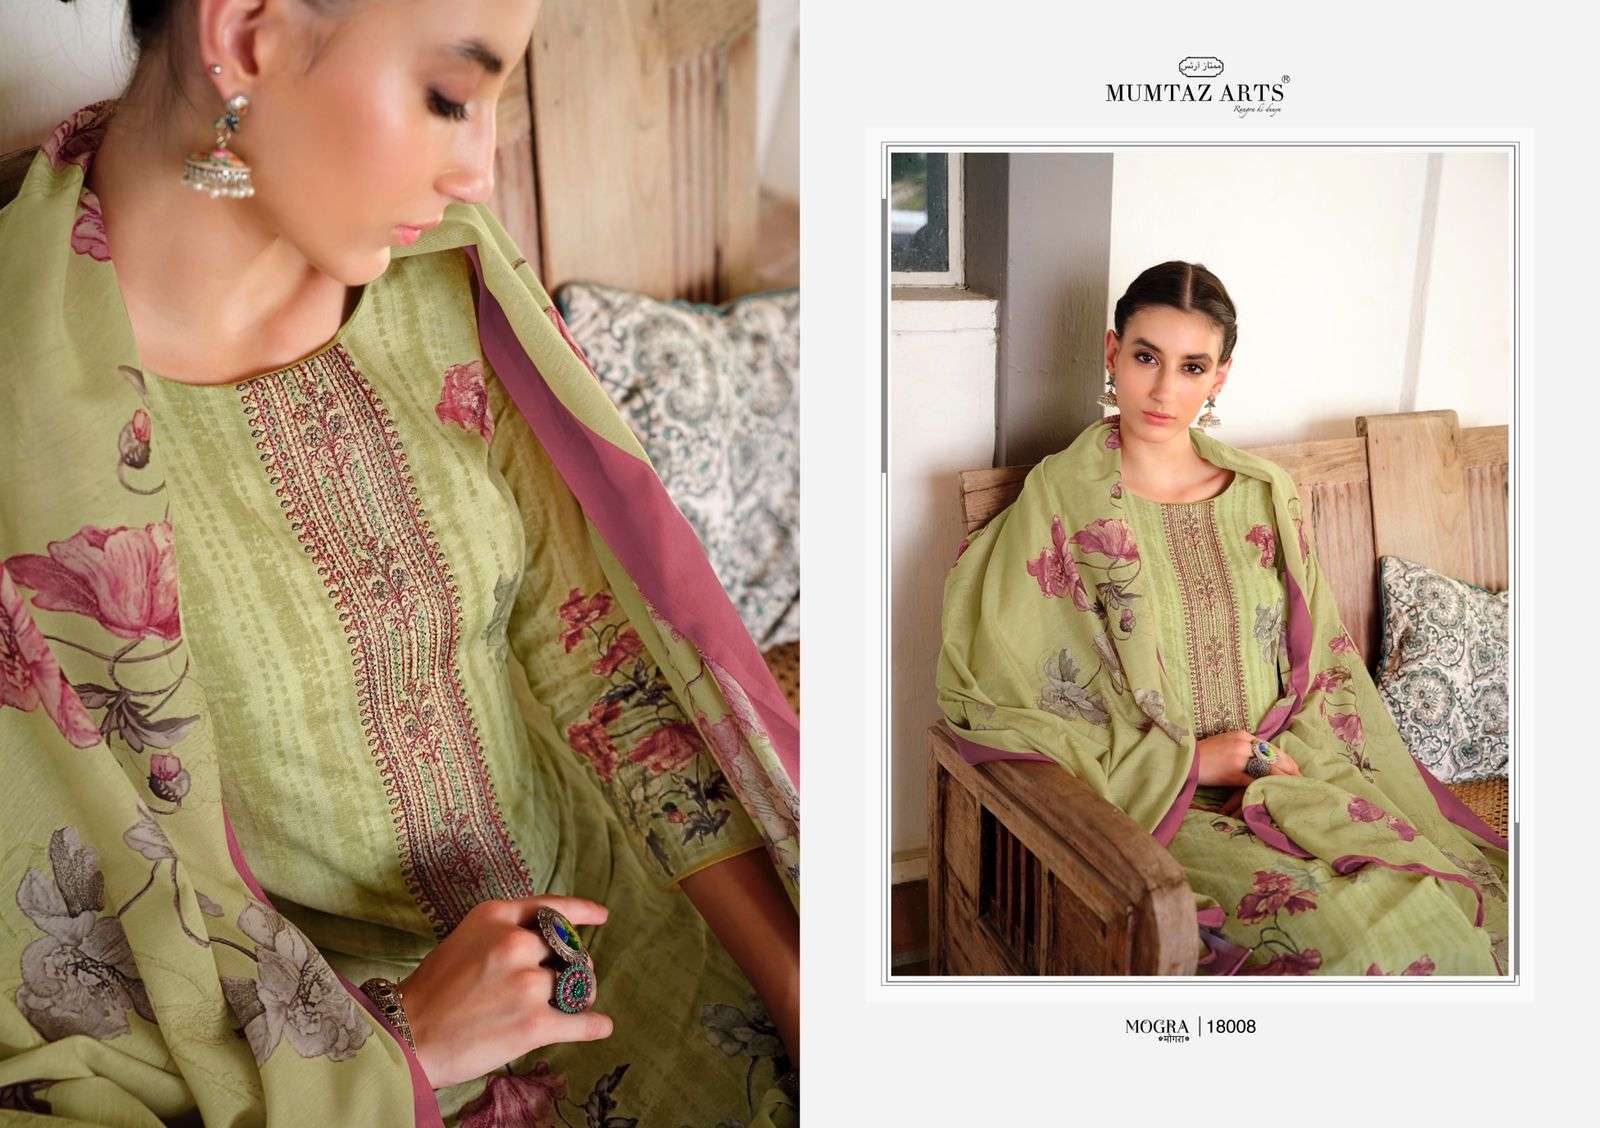 MUMTAZ ARTS MOGRA DESIGNER EXCLUSIVE EMBROIDERY WITH LAWN COTTON DIGITAL PRINTED SUITS IN WHOLESALE RATE